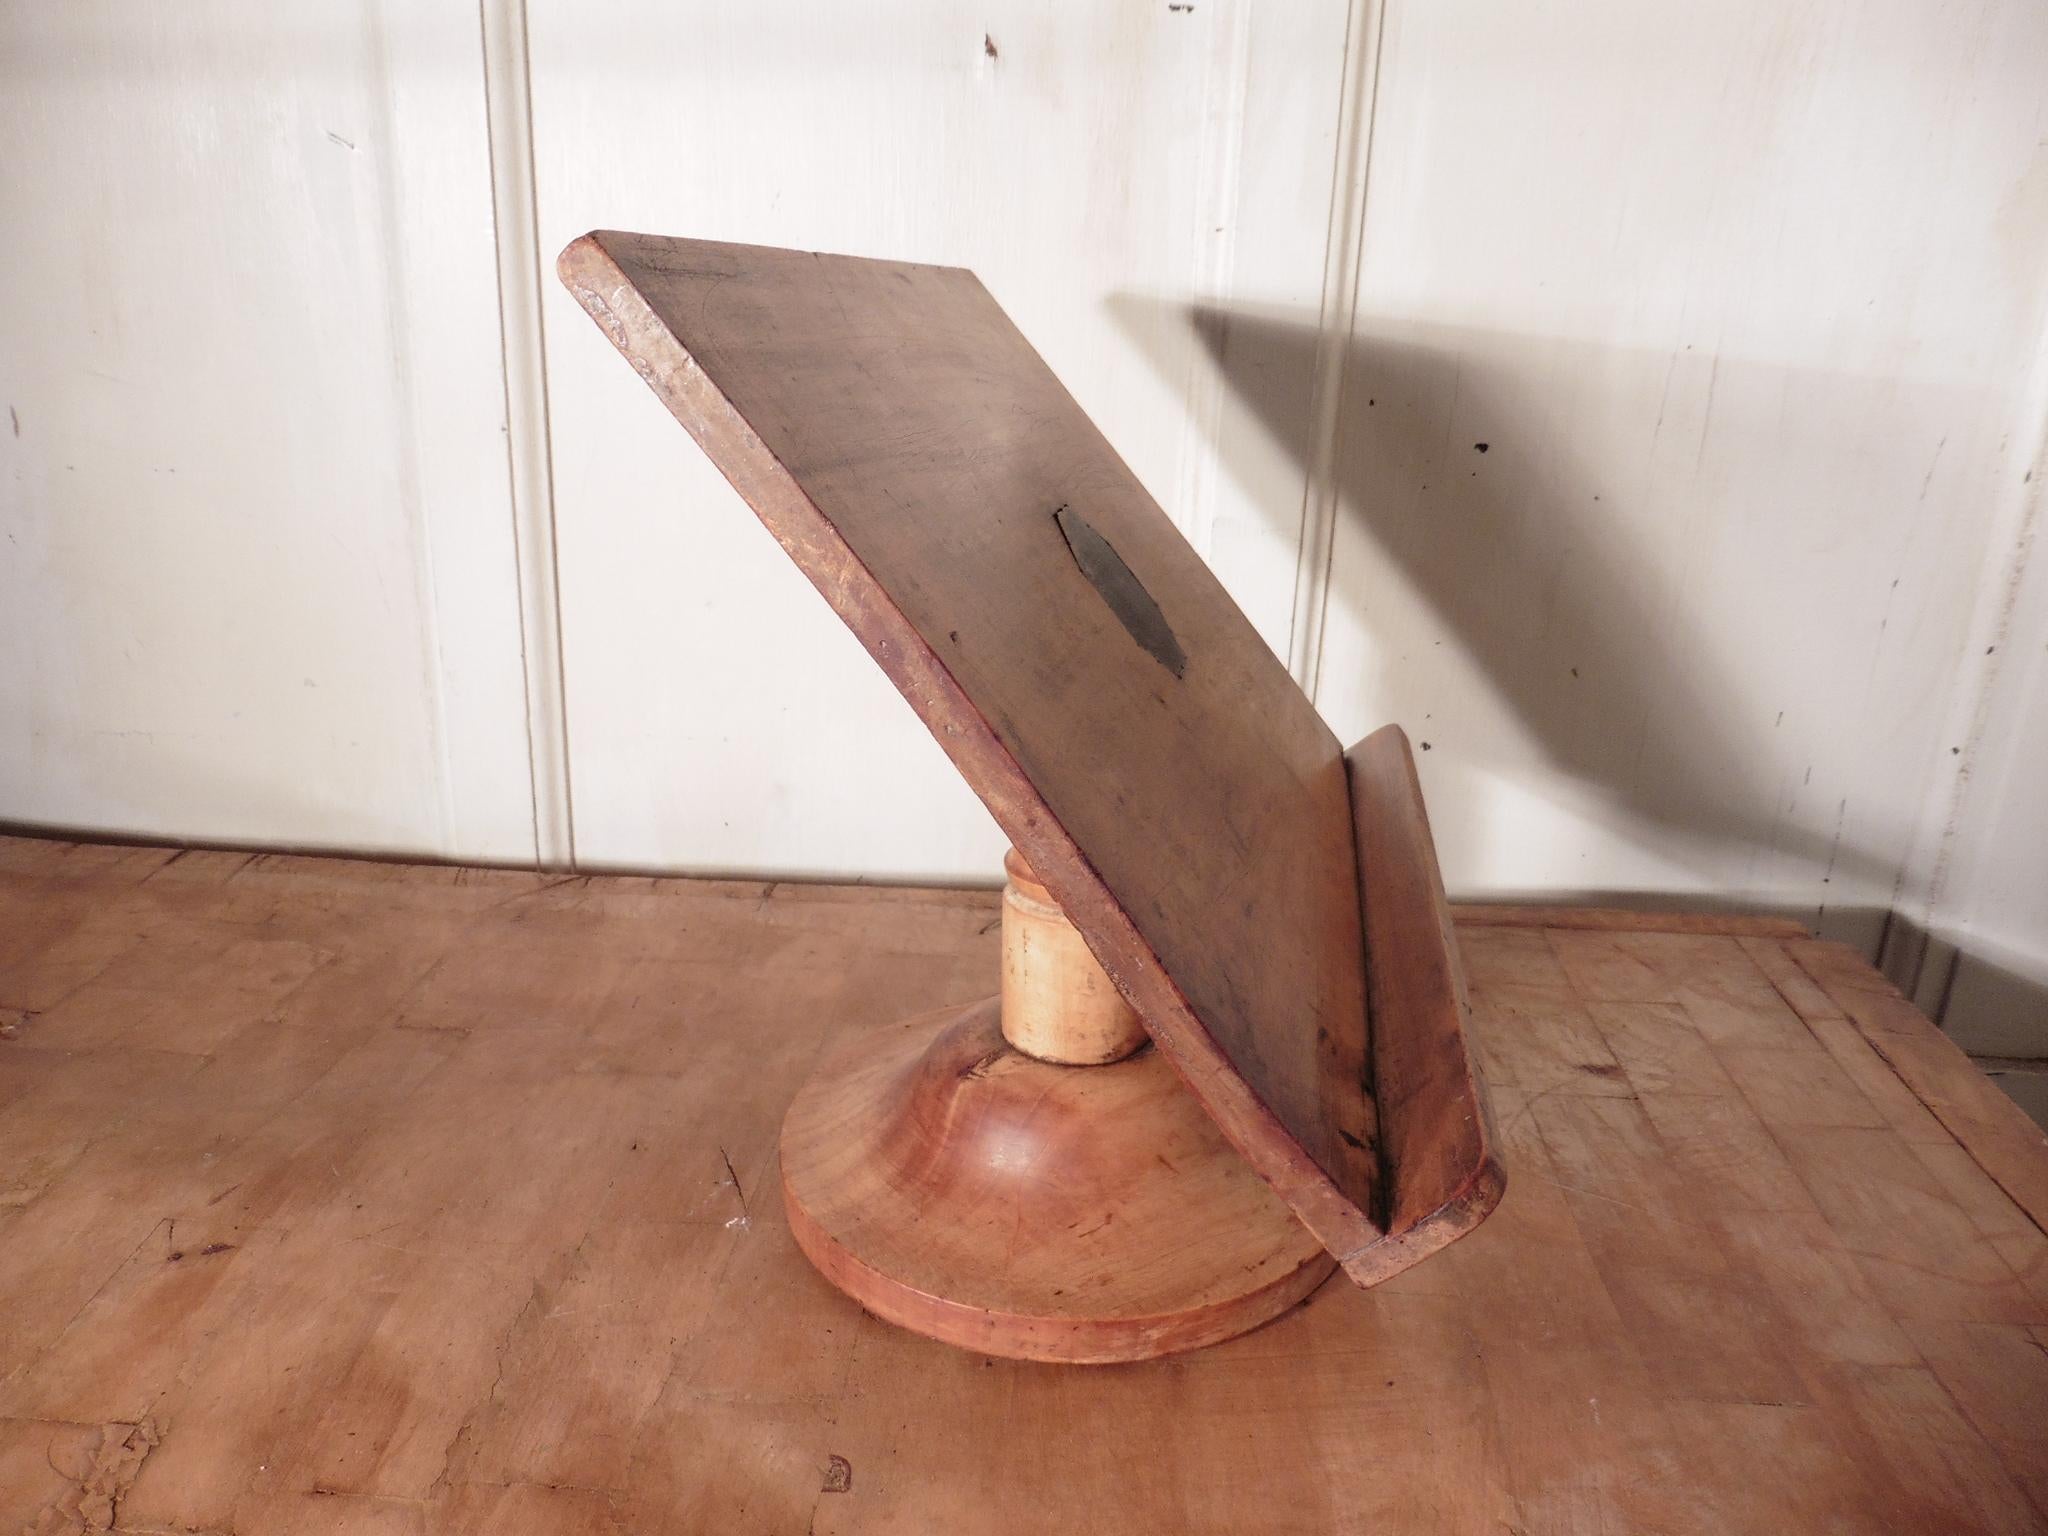 A French sycamore book rest, reading or music stand, Lutrin

This is a charming piece, it is made in sycamore and dates from the end of the 19th century, it has been superbly handcrafted by a skilful master.

The base of the stand is set on a